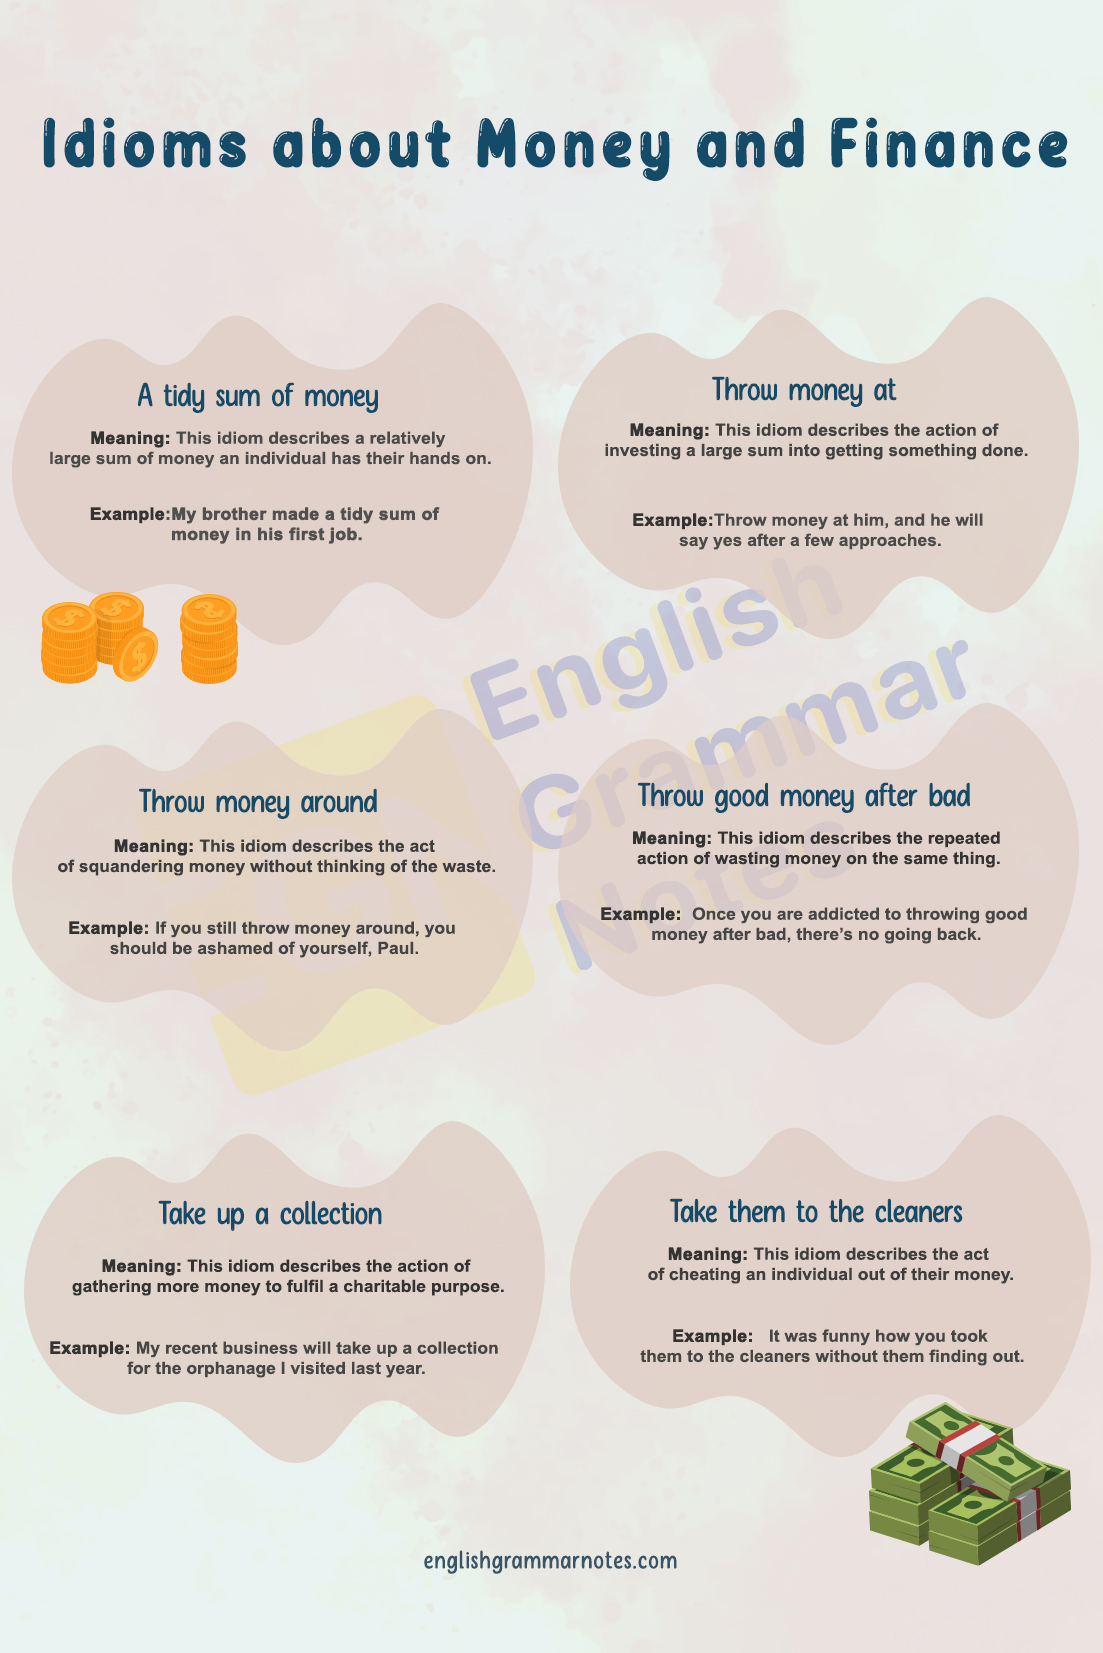 Idioms about Money and Finance 2